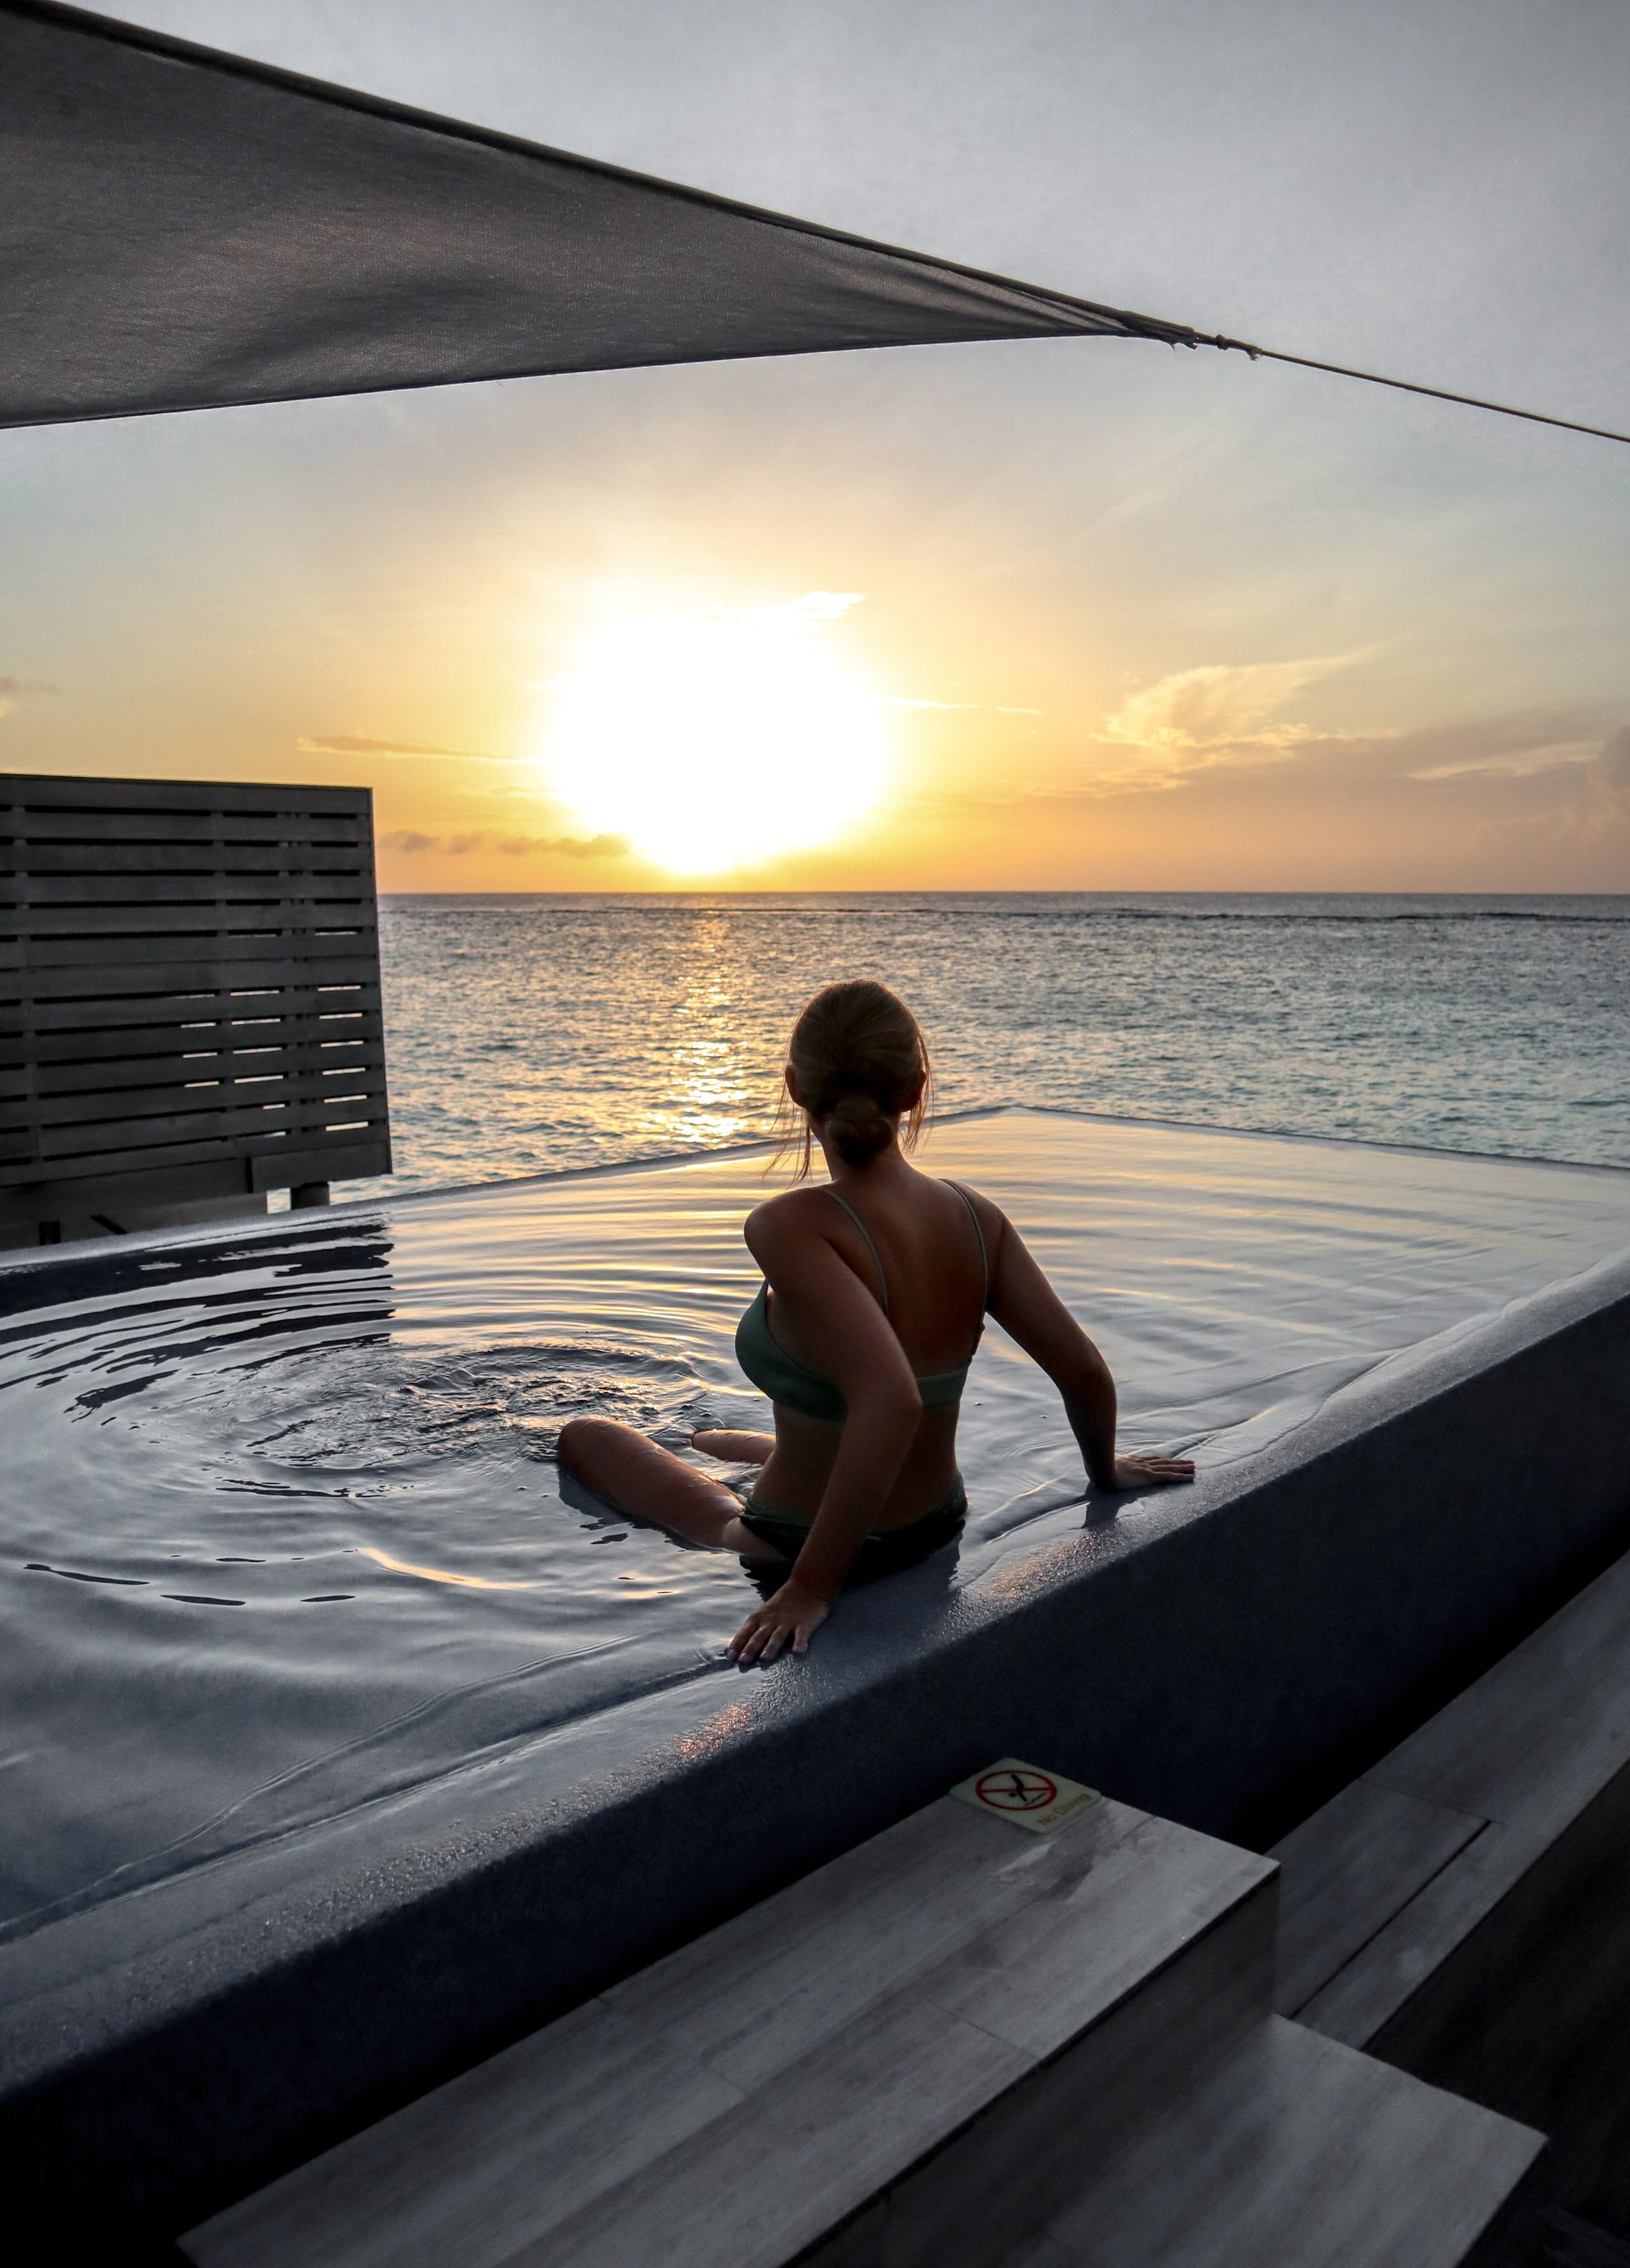 Honeymooning in the Maldives- A Look Inside LUX South Ari Atoll-87